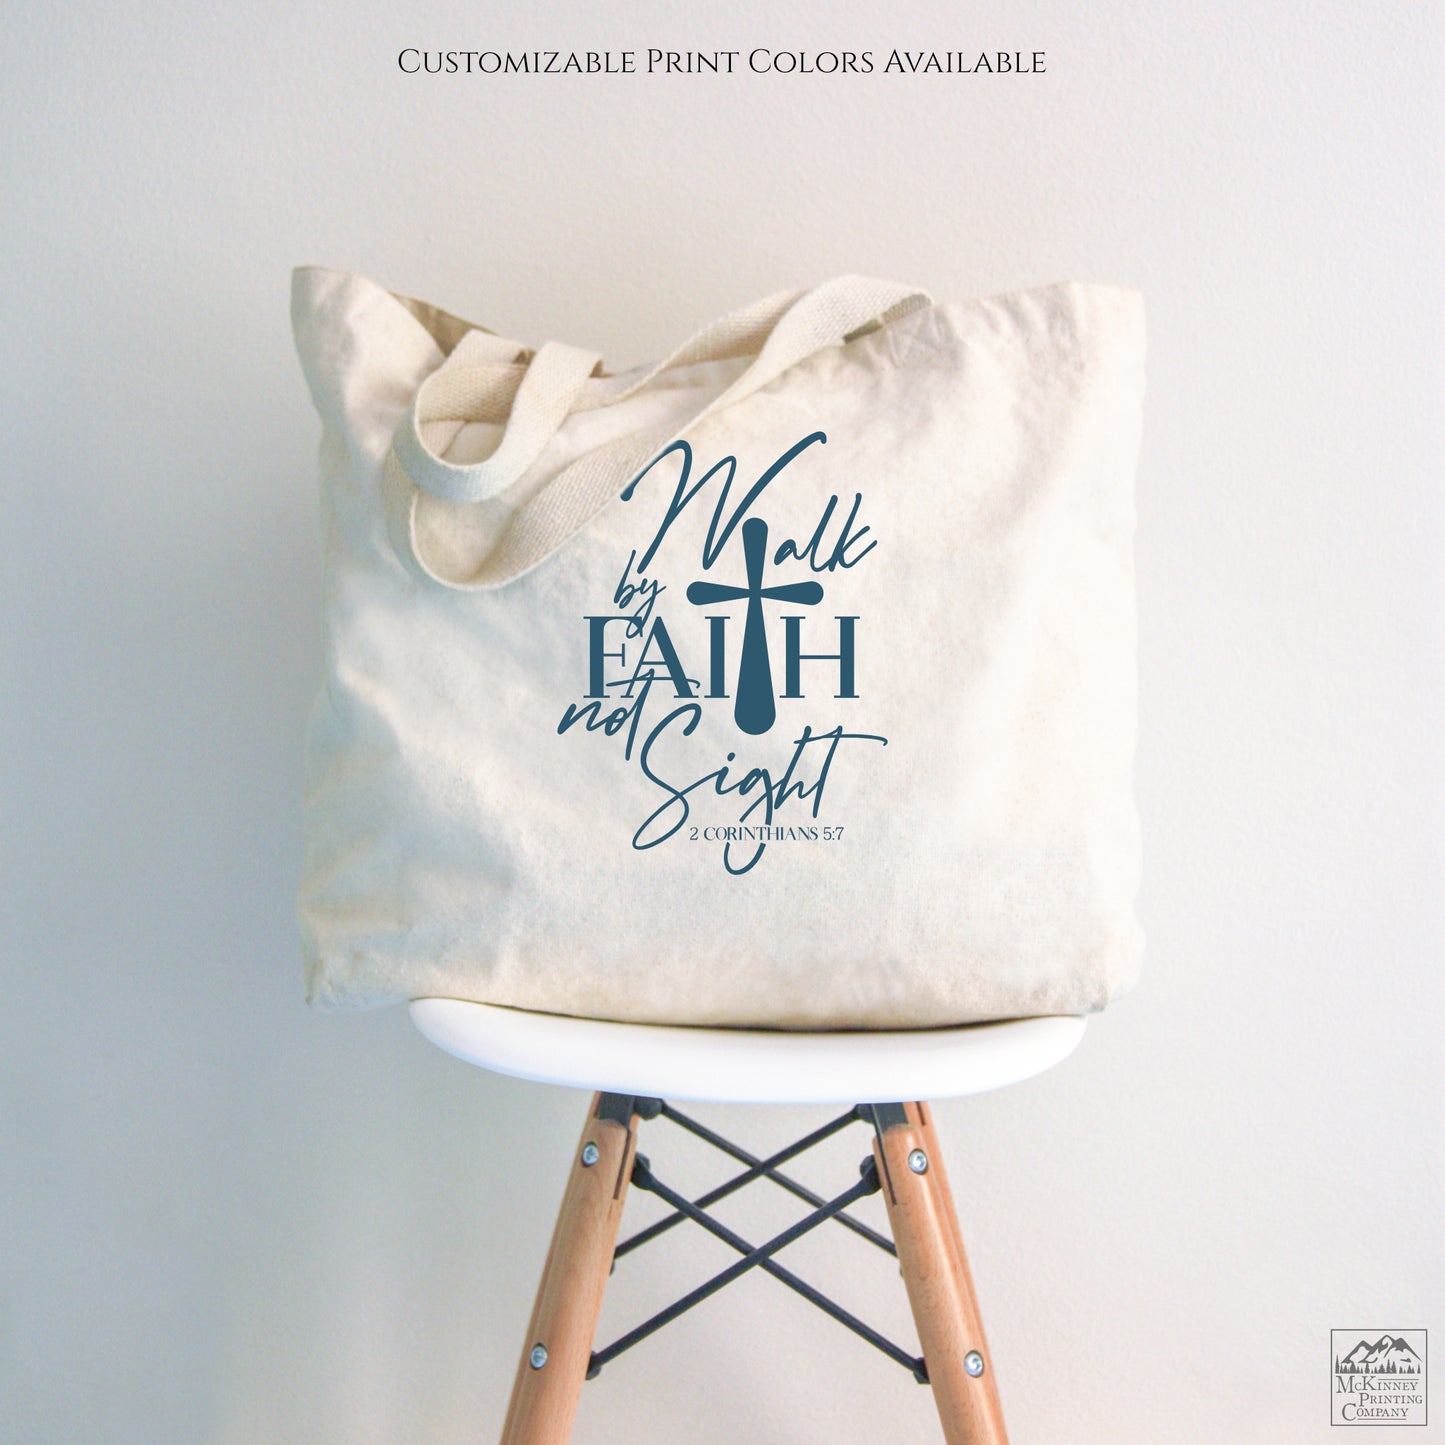 Walk by faith, not by sight - 2 Corinthians 5 7 - Christian Tote Bag, Fabric Shoulder Bag, Christian Gift